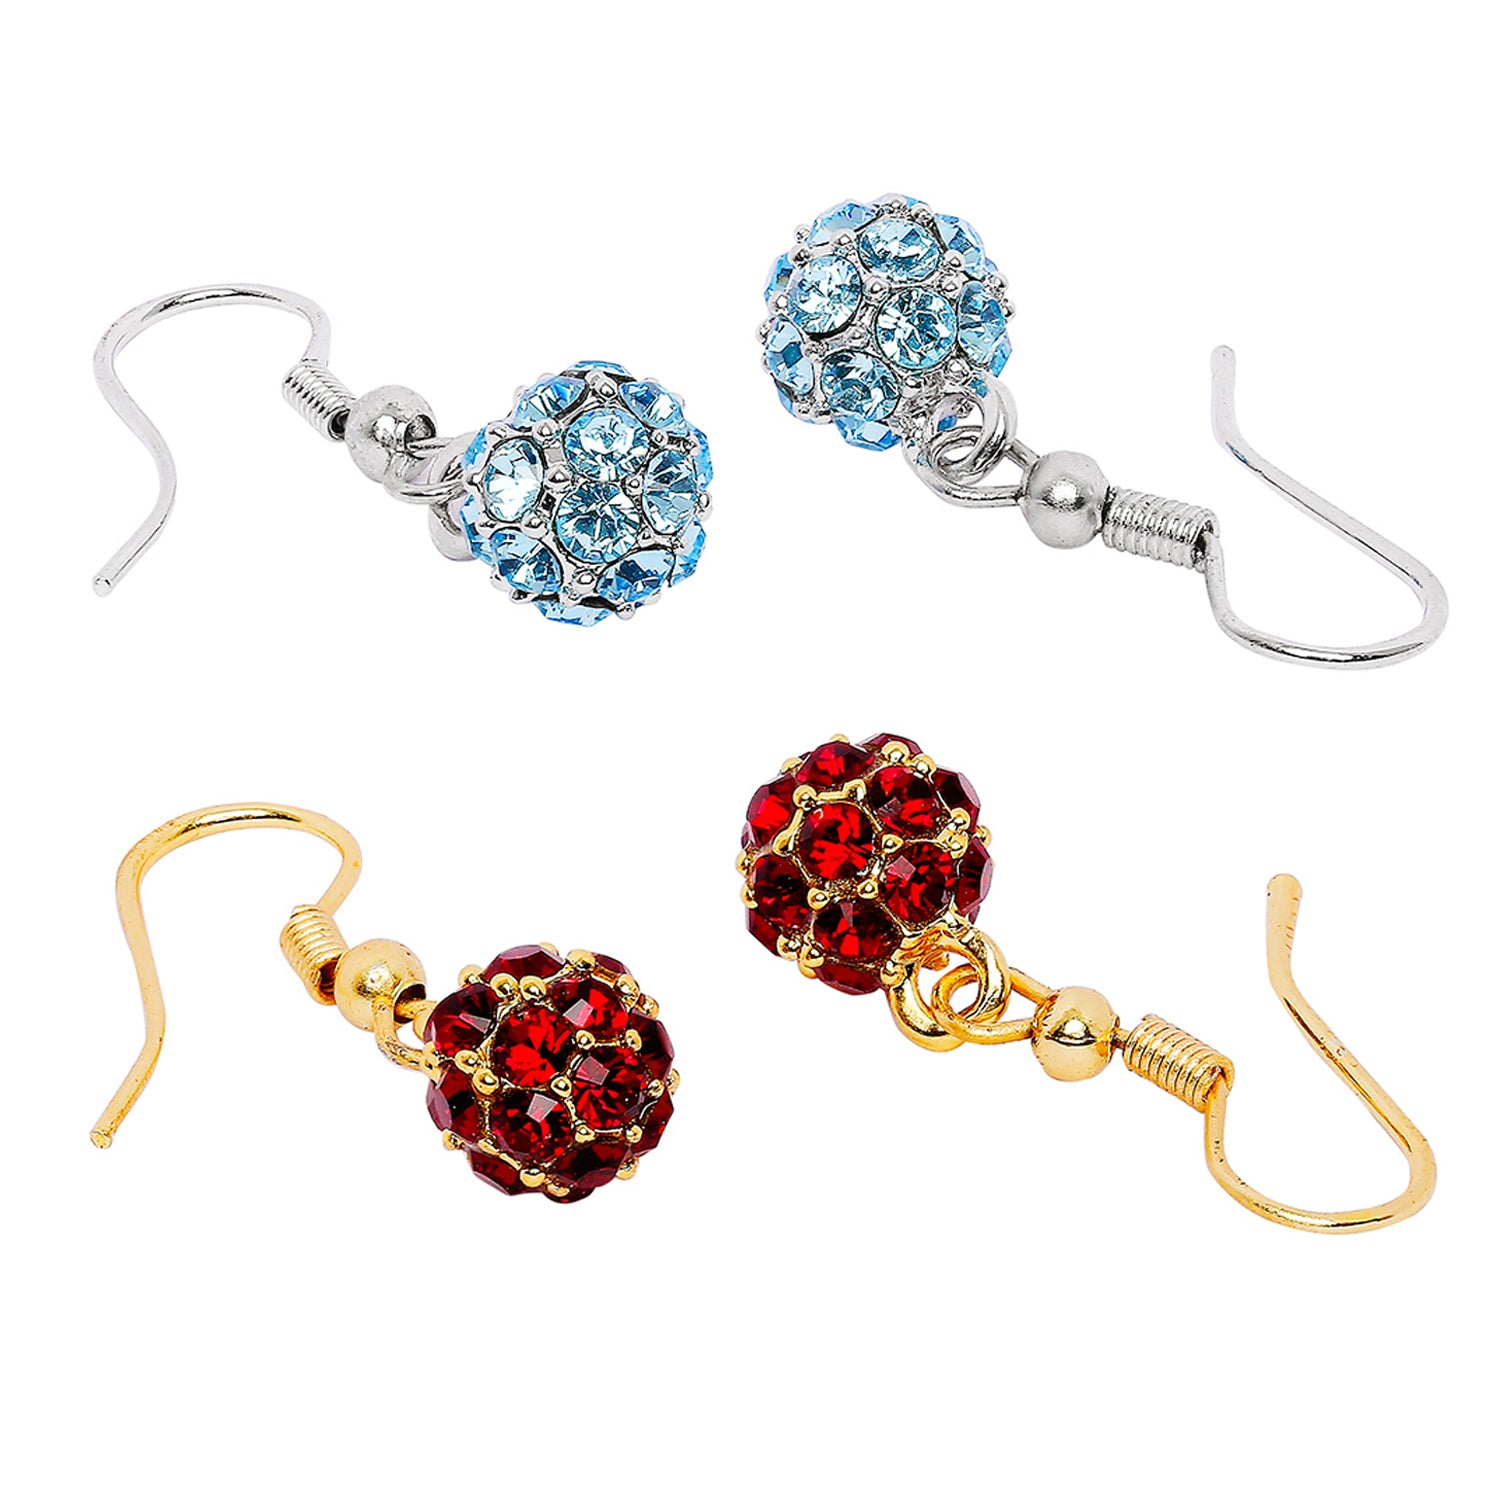 Combo of 2 Royal Sparklers Blue and Red Crystals Ball Earrings